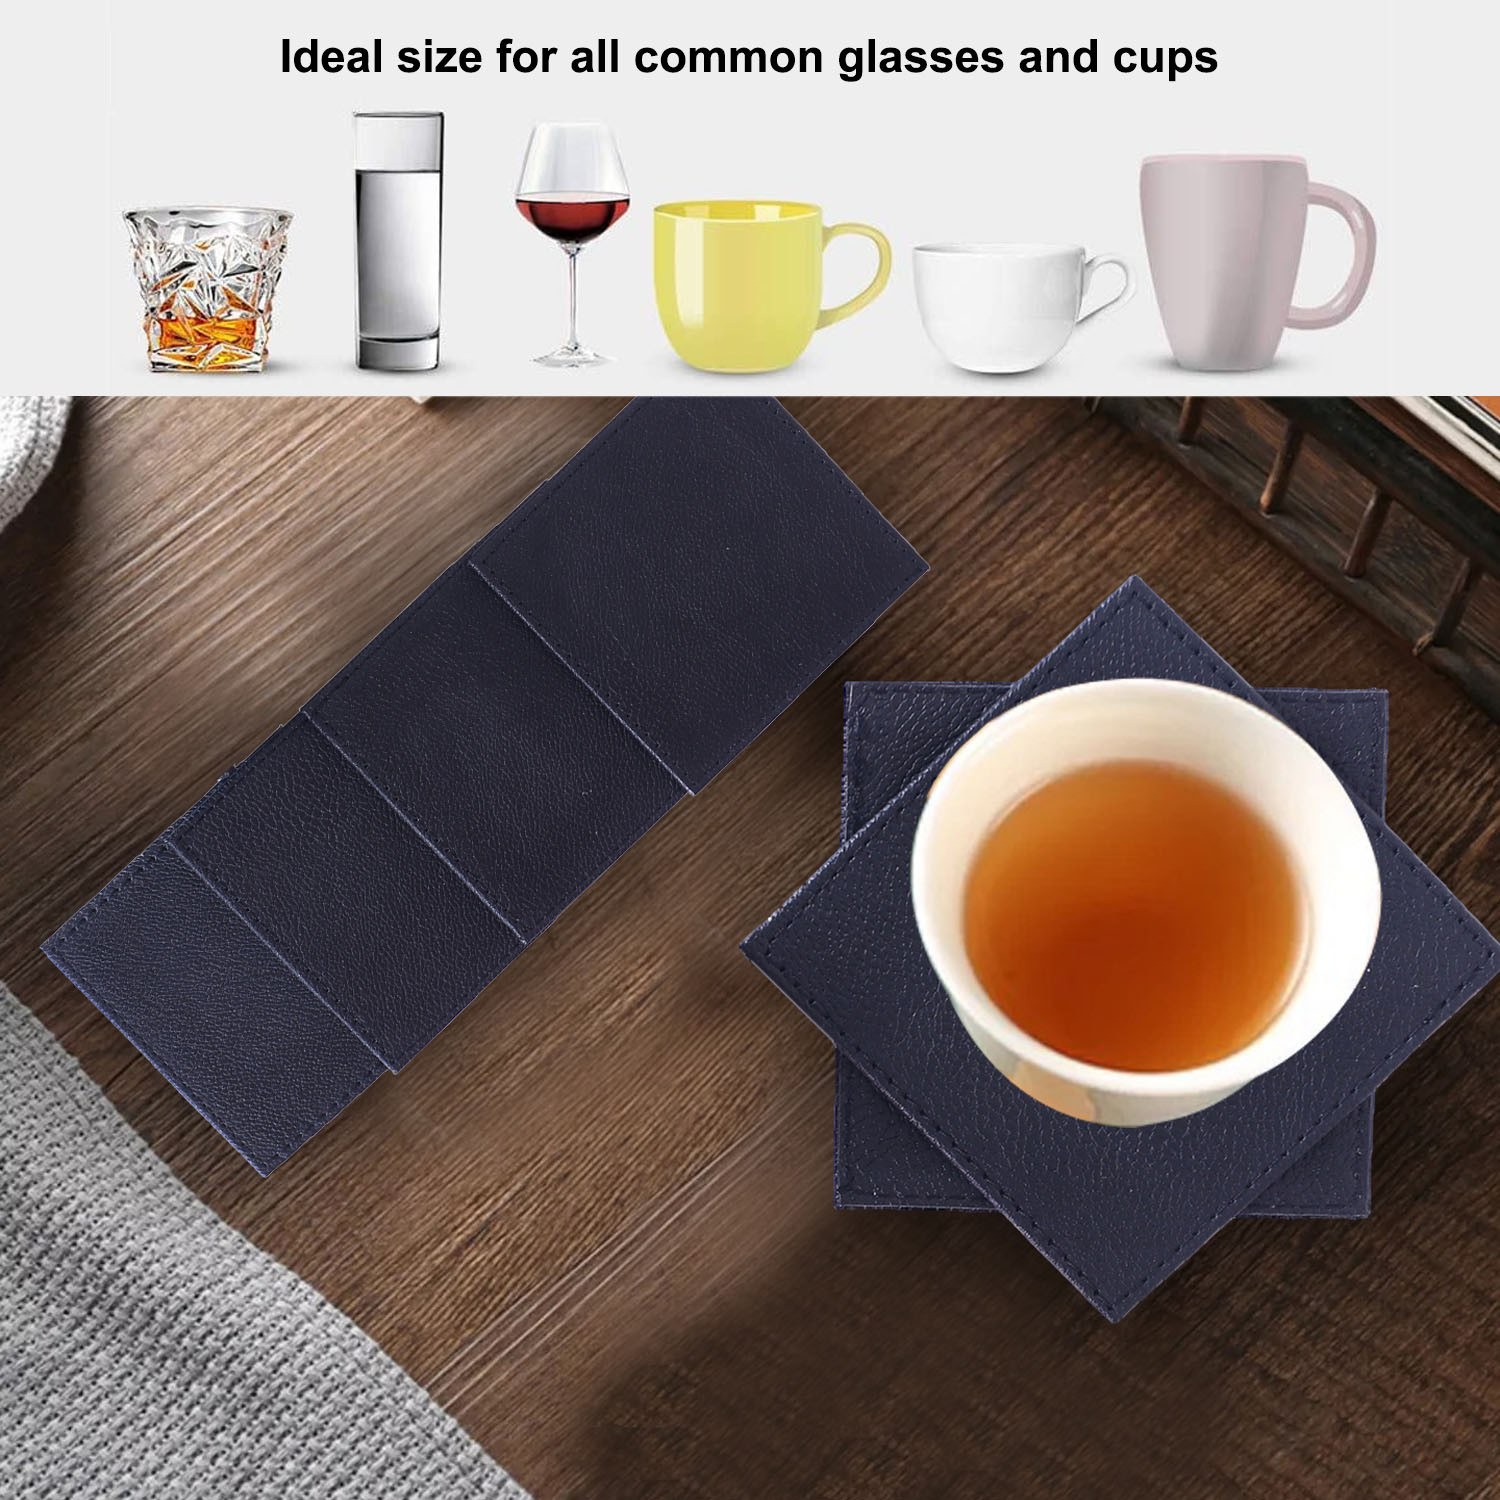 Kuber Industries Soft Leather Tea Coaster With Stand For Tea, Coffee & Dining Home Decor, Set of 6 (Black)